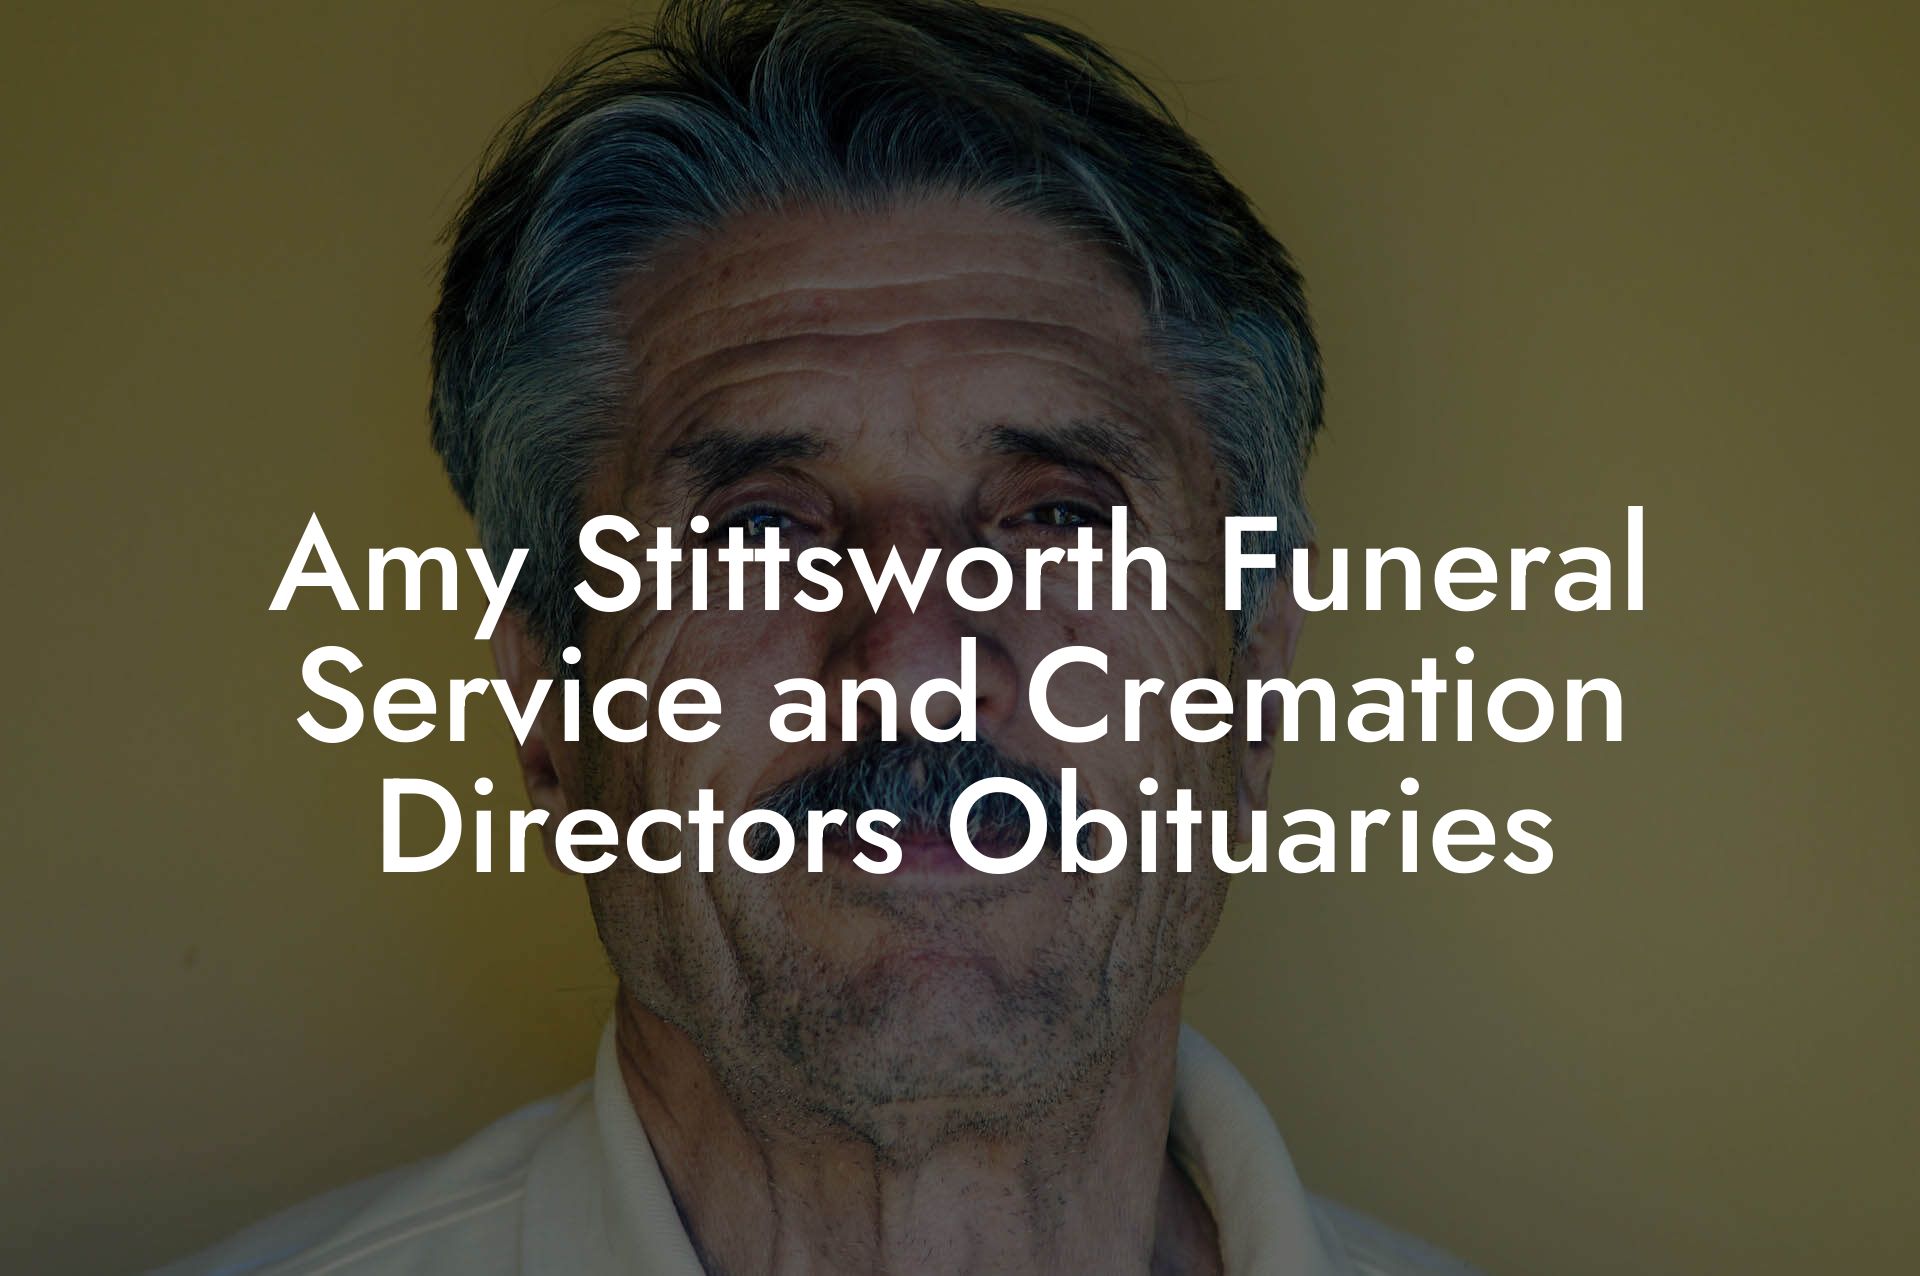 Amy Stittsworth Funeral Service and Cremation Directors Obituaries